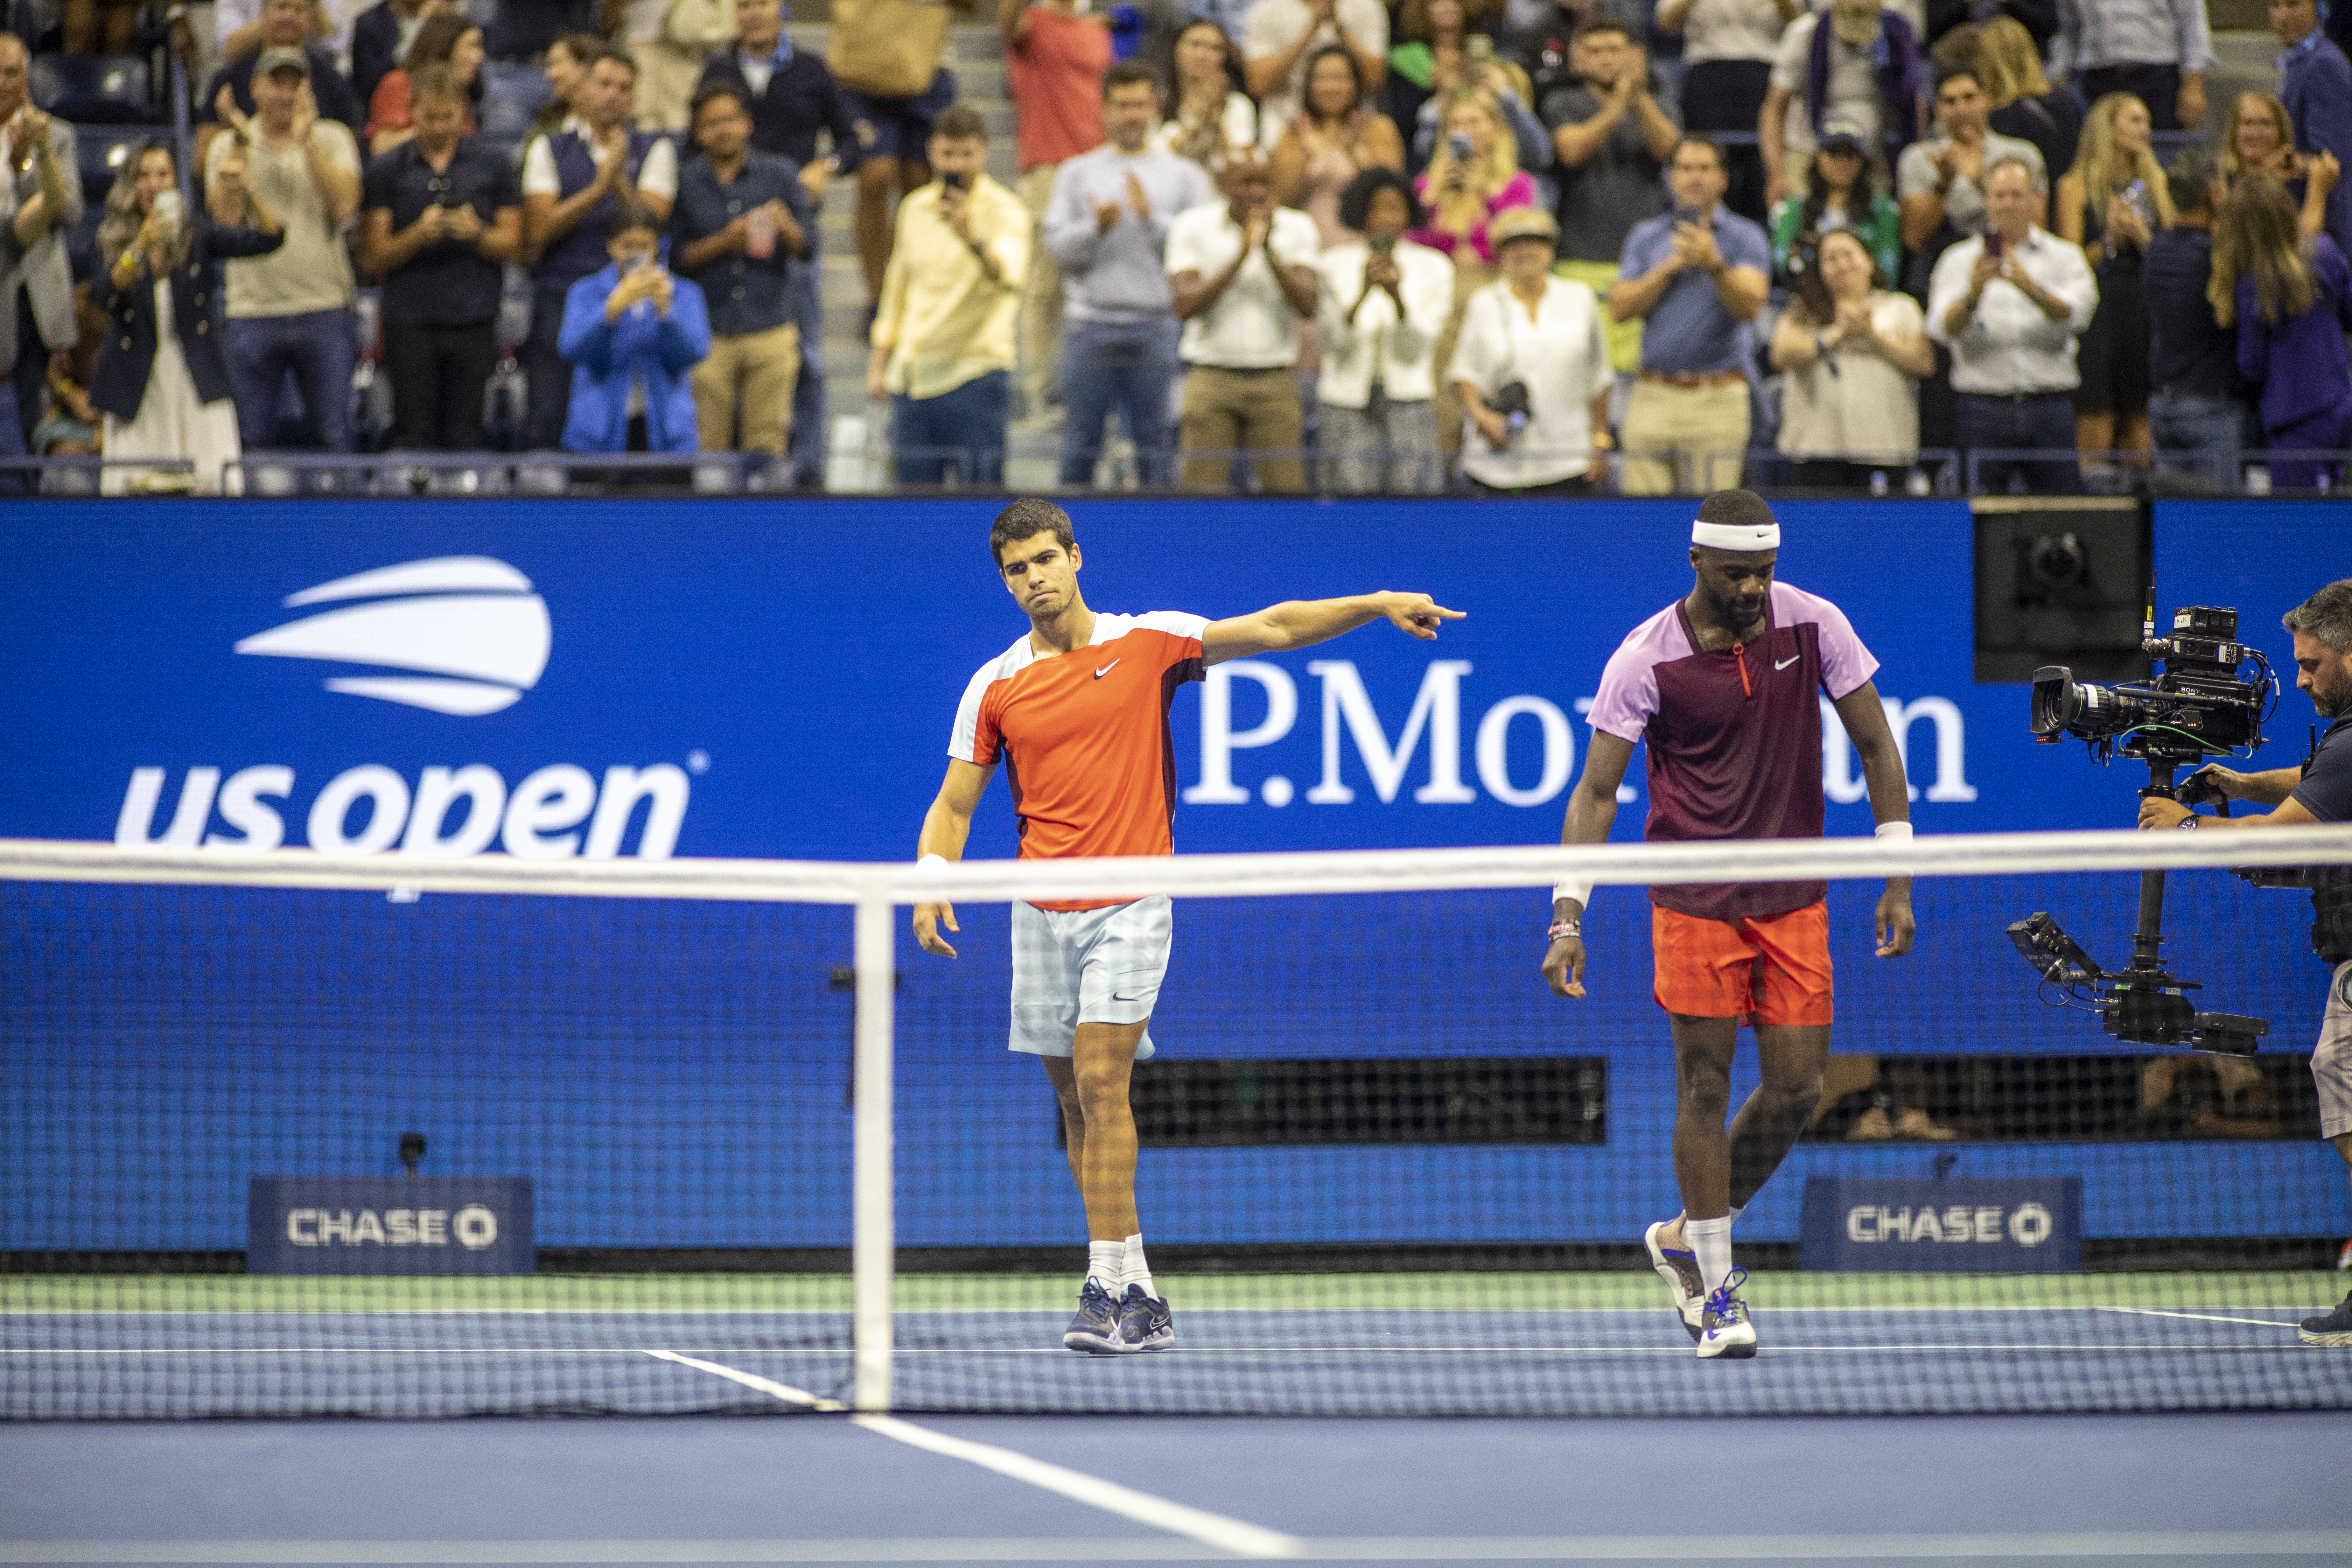 Winner Carlos Alcaraz of Spain points to Frances Tiafoe of the United States in appreciation after their five-set marathon in their Men’s Singles Semi-Final match on Arthur Ashe Stadium during the US Open Tennis Championship 2022 at the USTA National Tennis Centre on September 9th 2022 in Flushing, Queens, New York City.